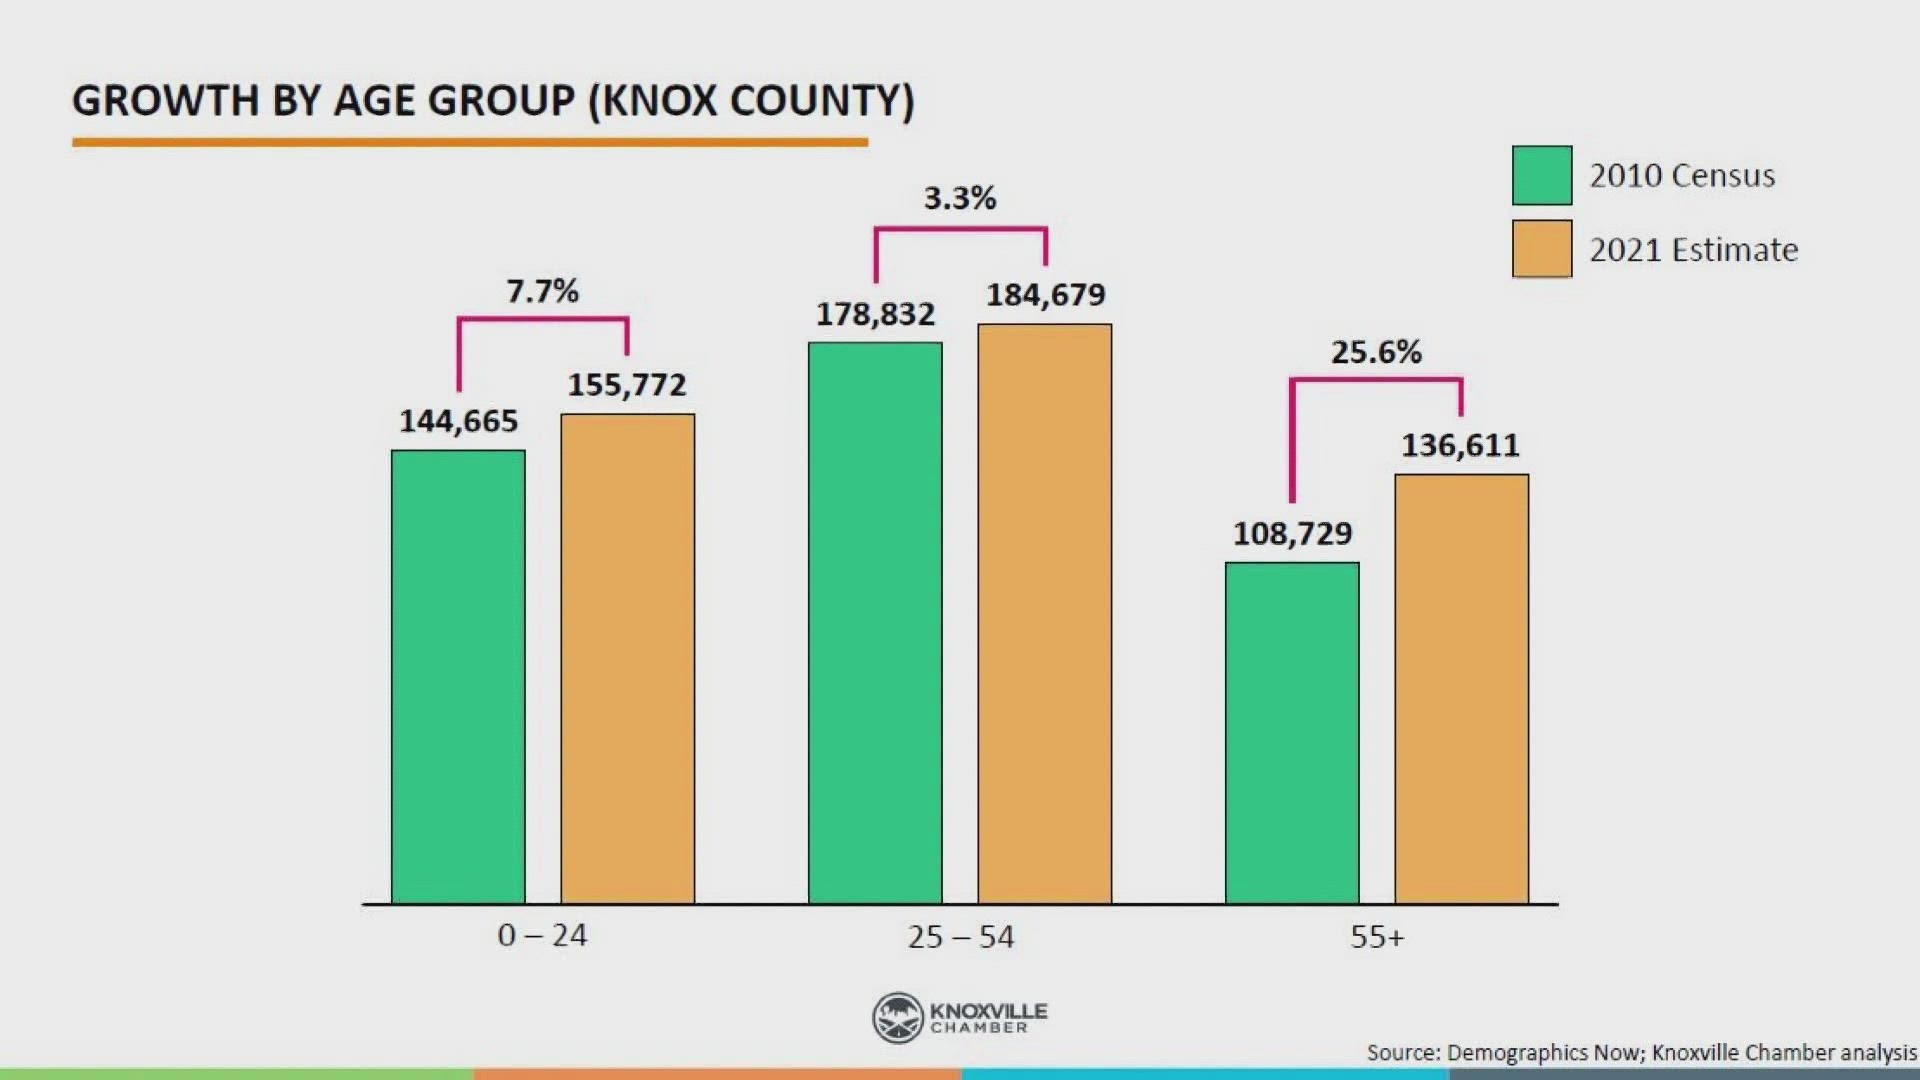 A report said the county's economy is not built for the future. The chamber cited growth in people 55 and up, lower-than-average pay and a lack of specialized jobs.